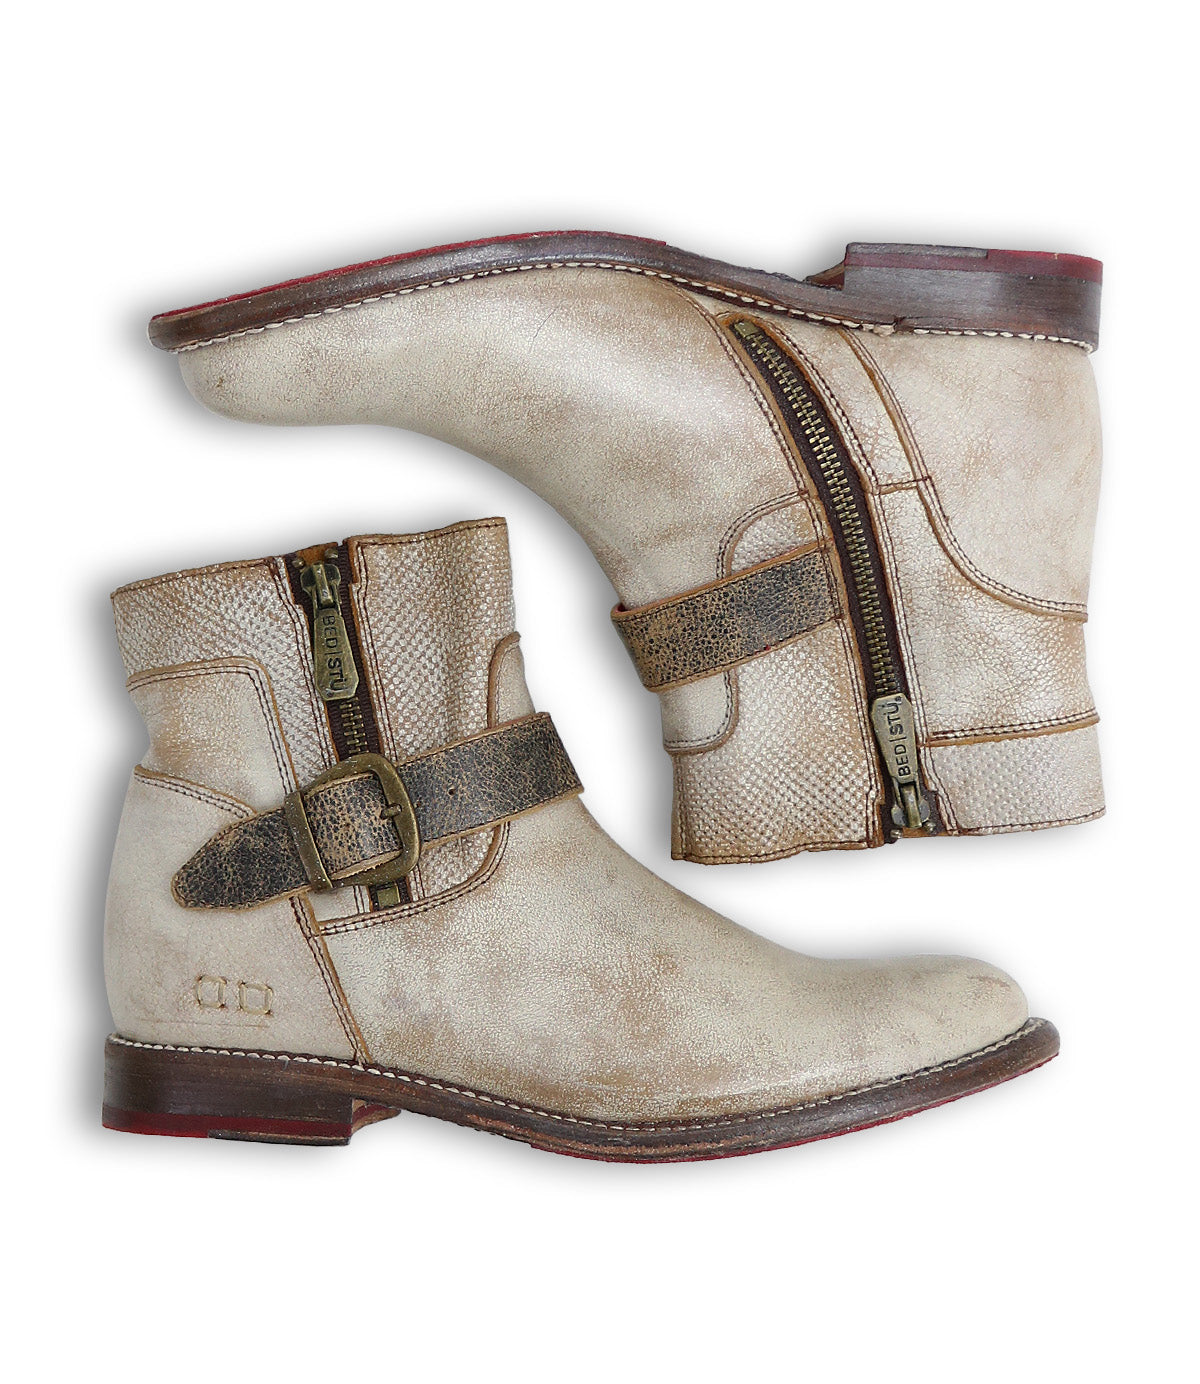 A pair of Becca leather boots with a buckle on the side by Bed Stu.